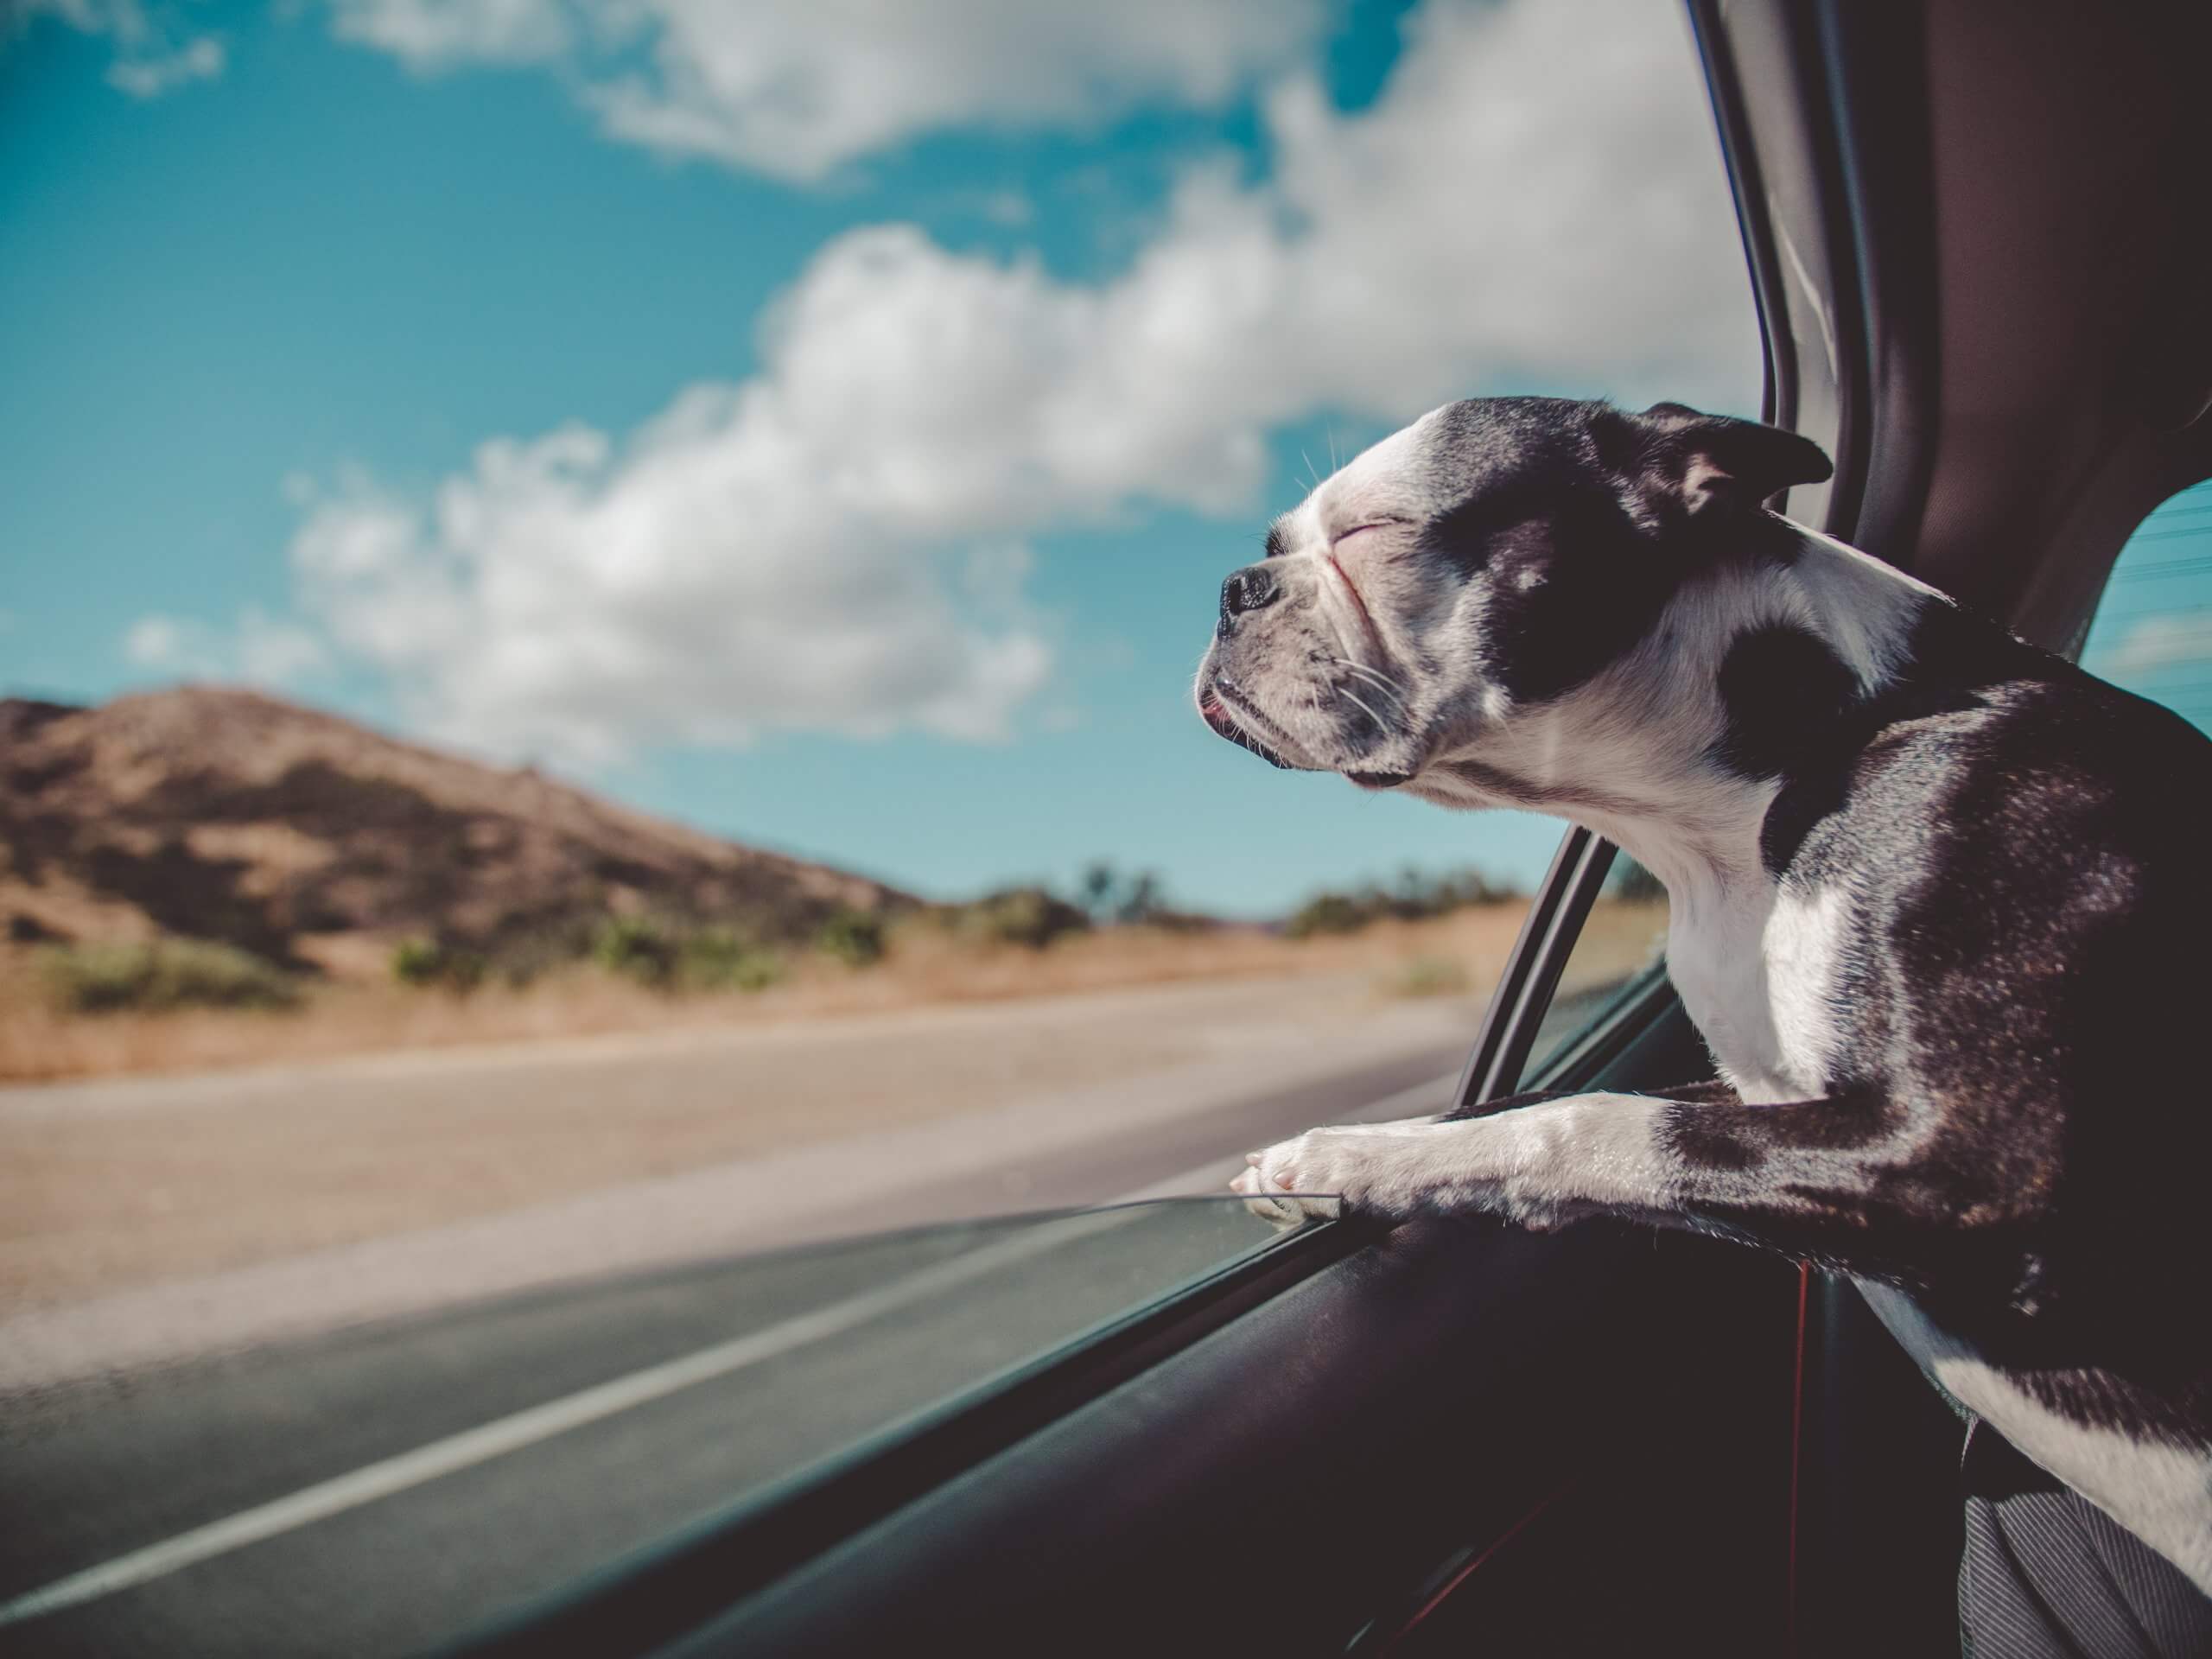 Boston terrier rides in the car with head out the window.